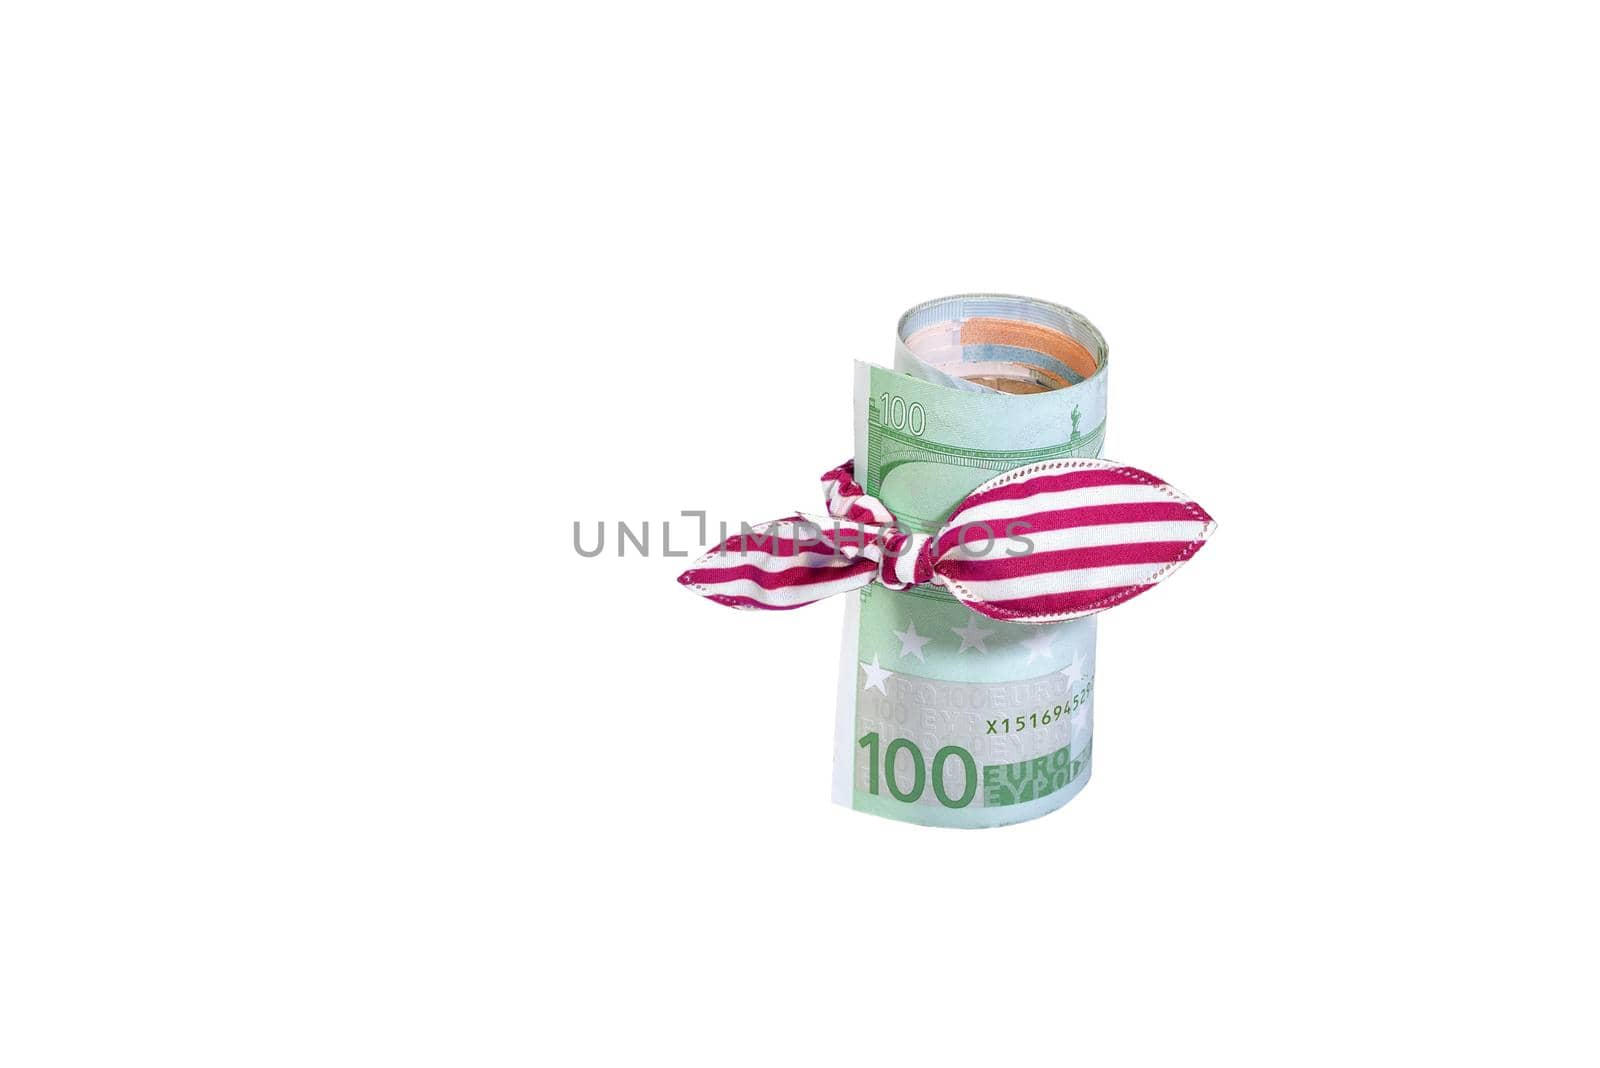 Hundred euros banknote curtailed by a tubule with purple elastic band with a bow isolated on white